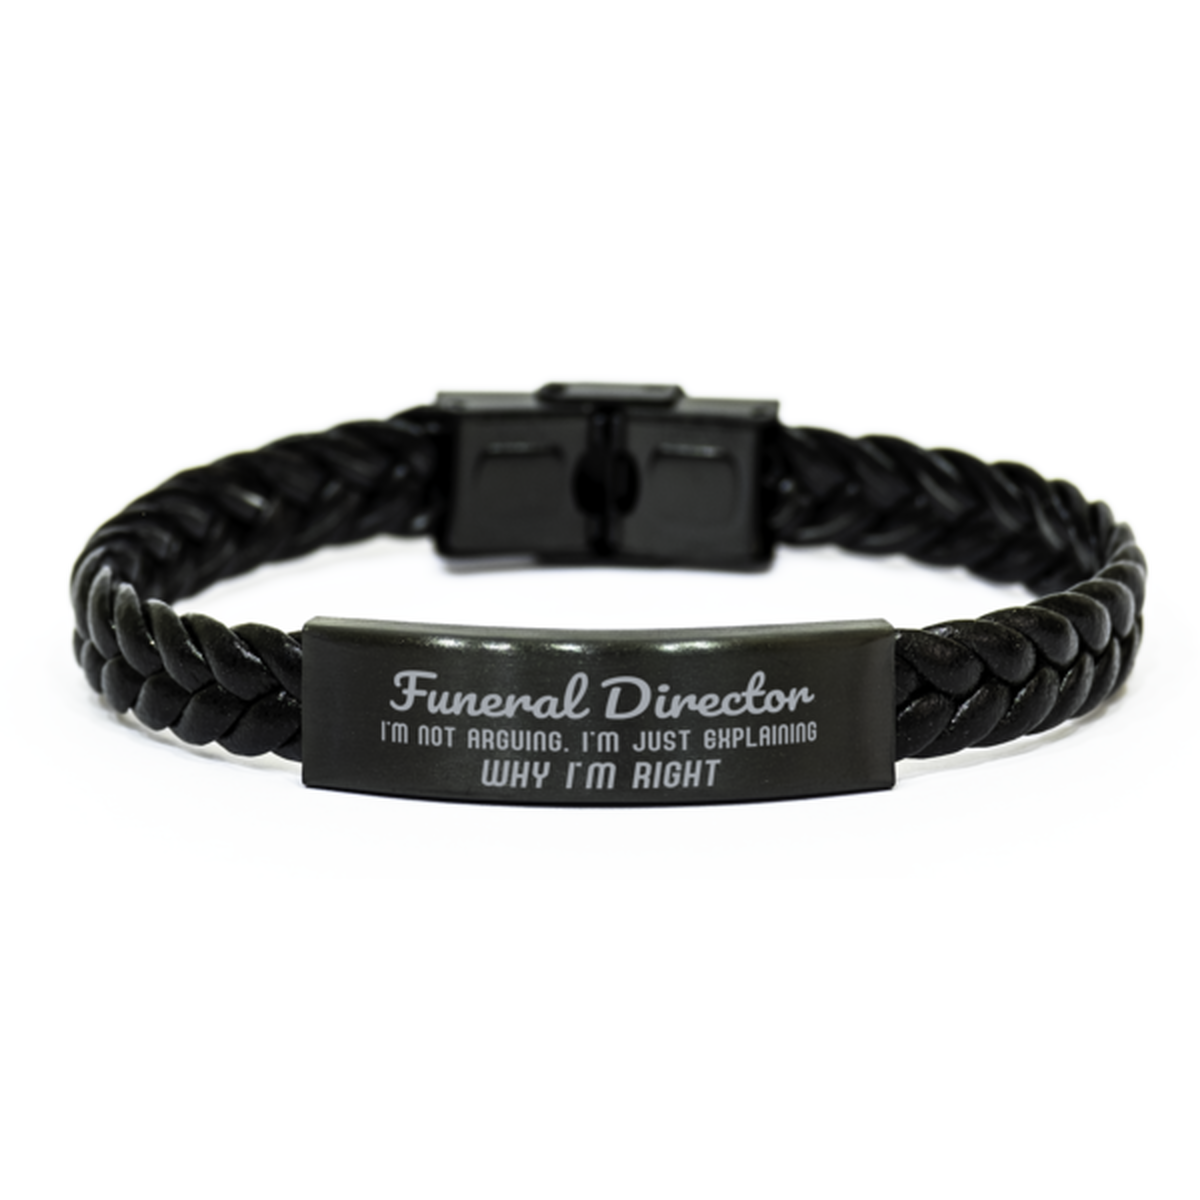 Funeral Director I'm not Arguing. I'm Just Explaining Why I'm RIGHT Braided Leather Bracelet, Graduation Birthday Christmas Funeral Director Gifts For Funeral Director Funny Saying Quote Present for Men Women Coworker